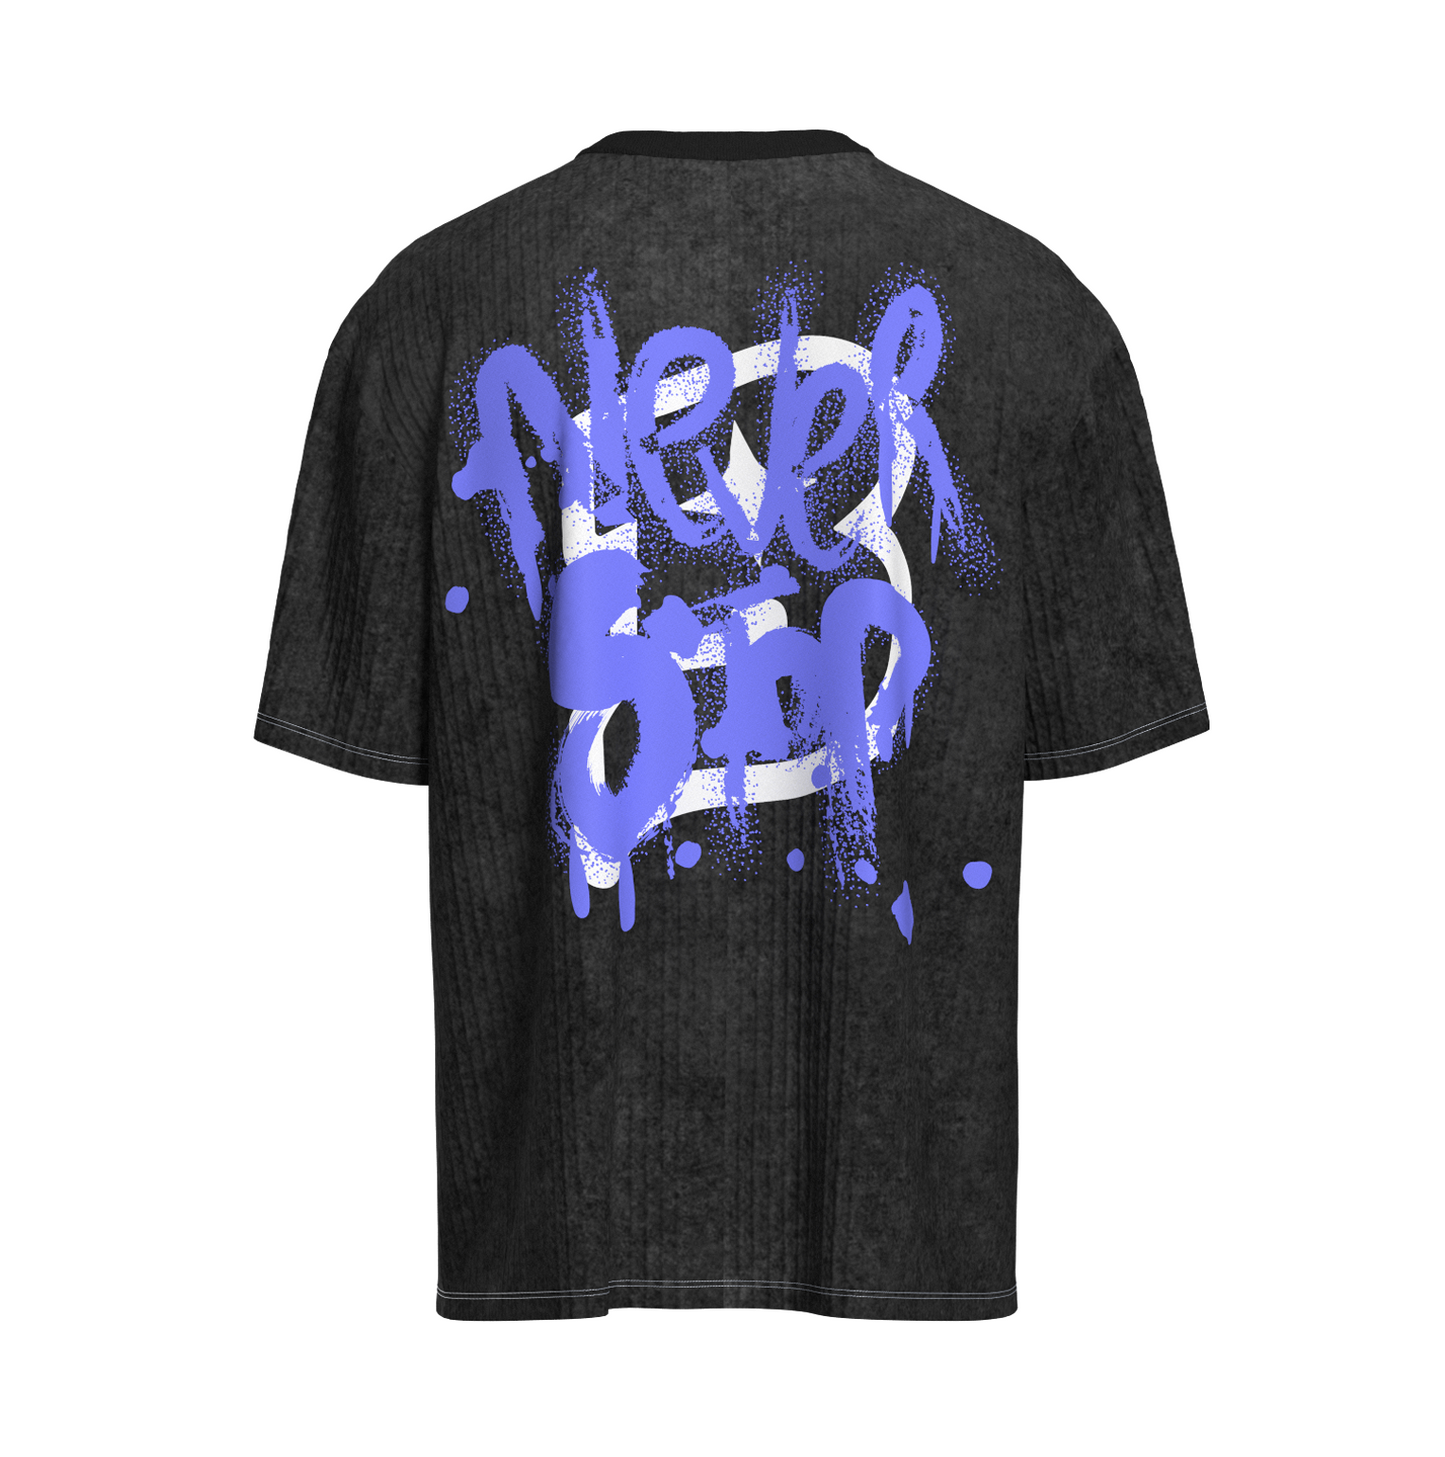 Rear view image of Never stop black tee from ballucci.